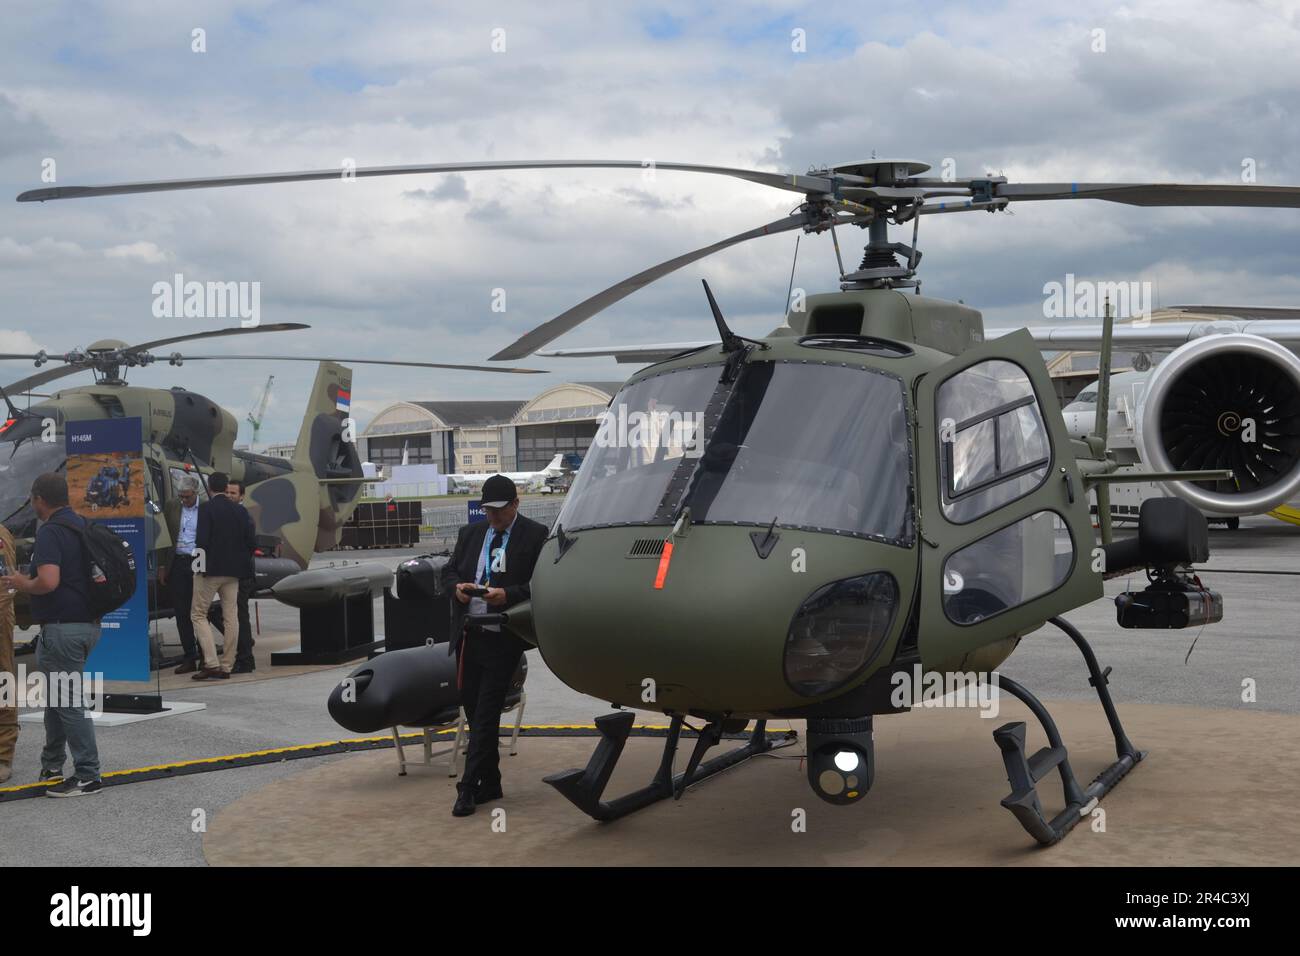 A large, military-style helicopter is parked on the tarmac of an airport Stock Photo